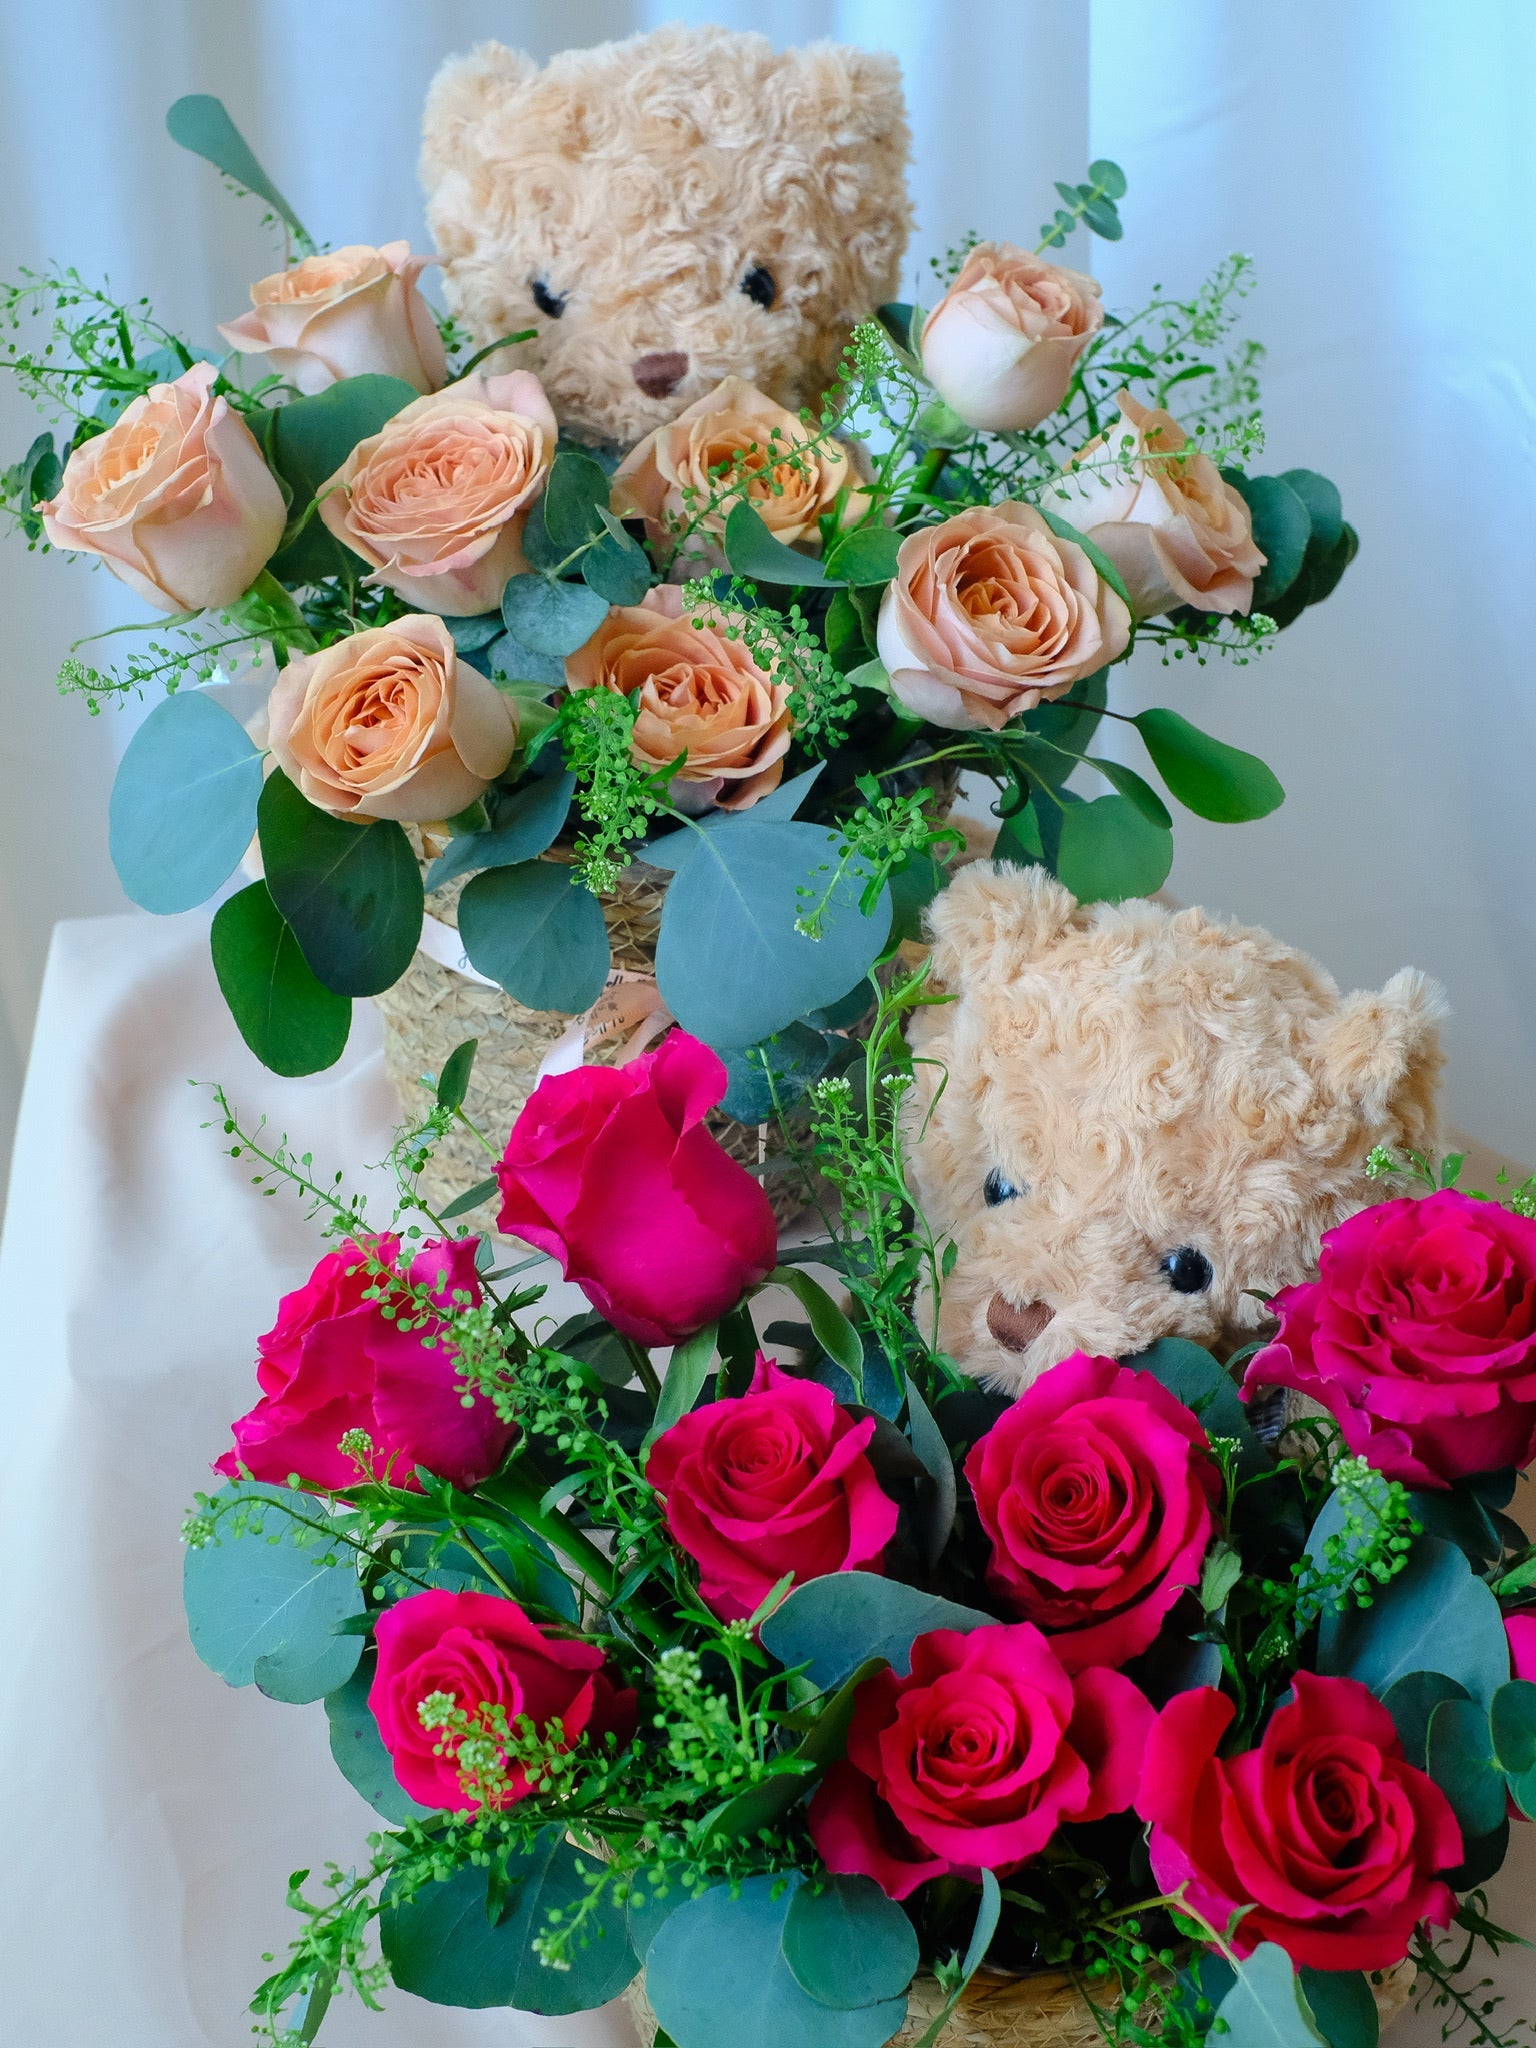 Bella - Cappuccino Roses in Teddy Bear Holder